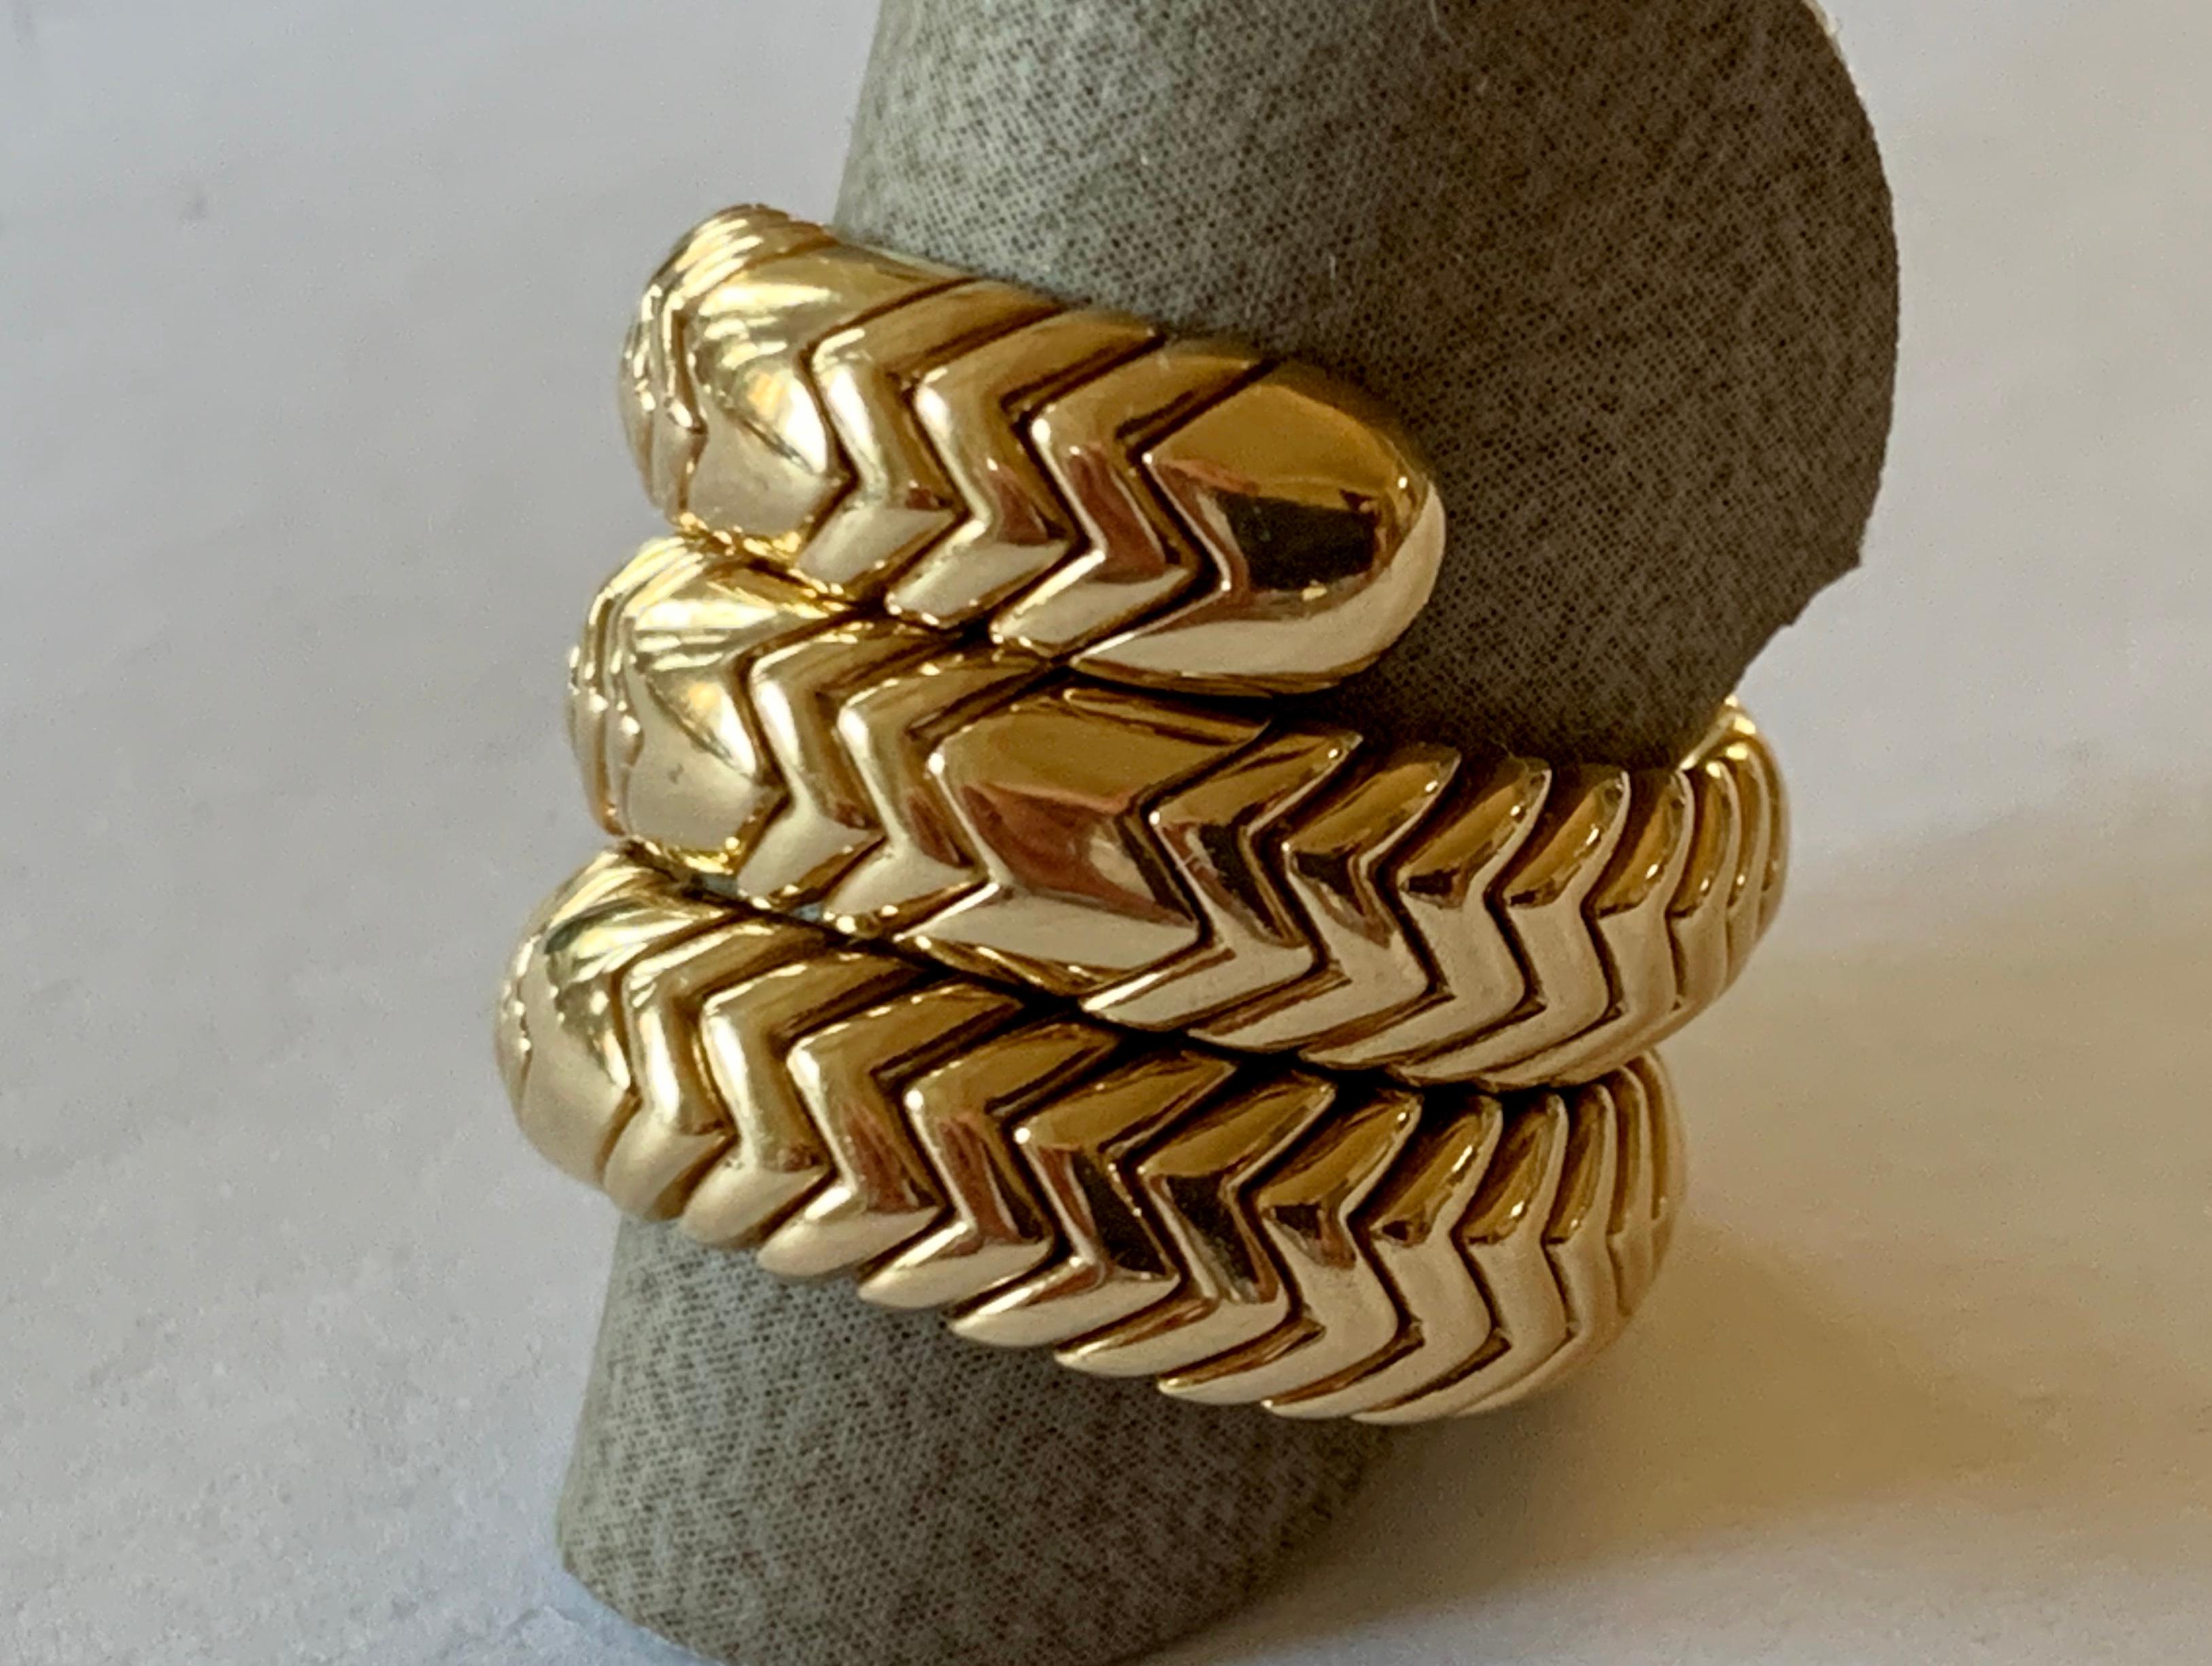 Designed as a spiral this Ring from the Spiga collection, size 53, slightly adjustable. signed Bulgari. Matching Bulgari Spiga earclips available. 